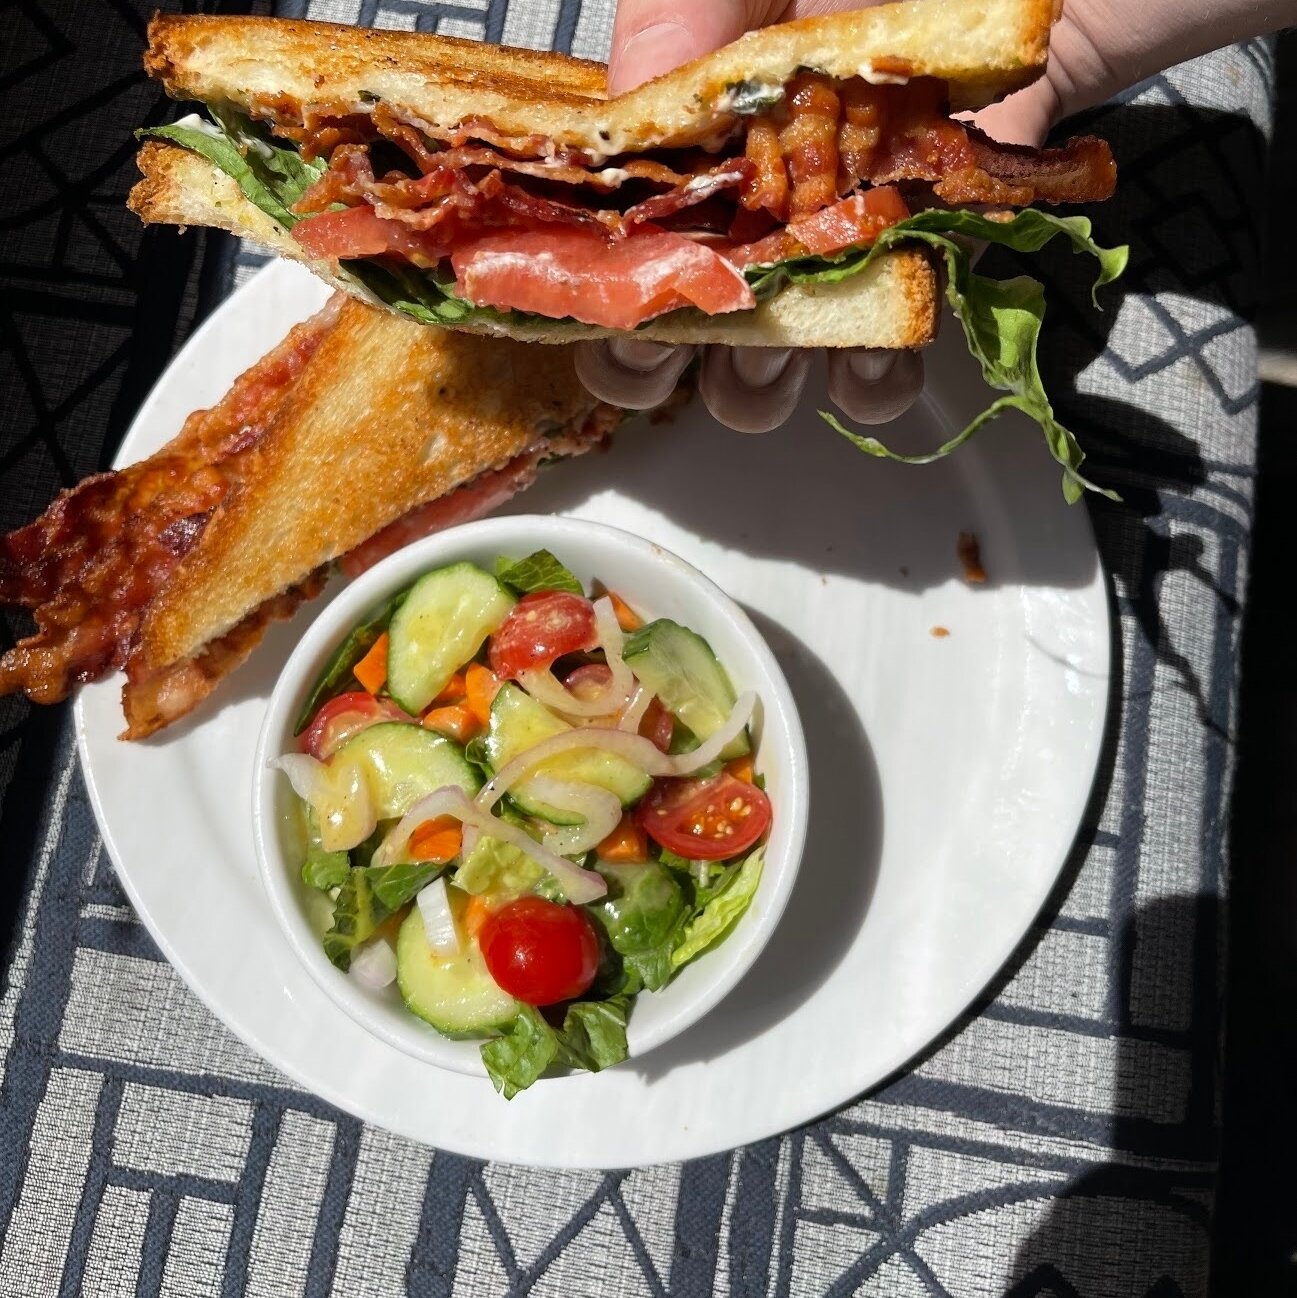 What's better on a rainy Sunday than a fresh BLT for Brunch? Come join us today and put that grey sky behind you! 😎⁠
.⁠
.⁠
.⁠
#sundaybrunch #brunch #publife #thealbert #weloveatl